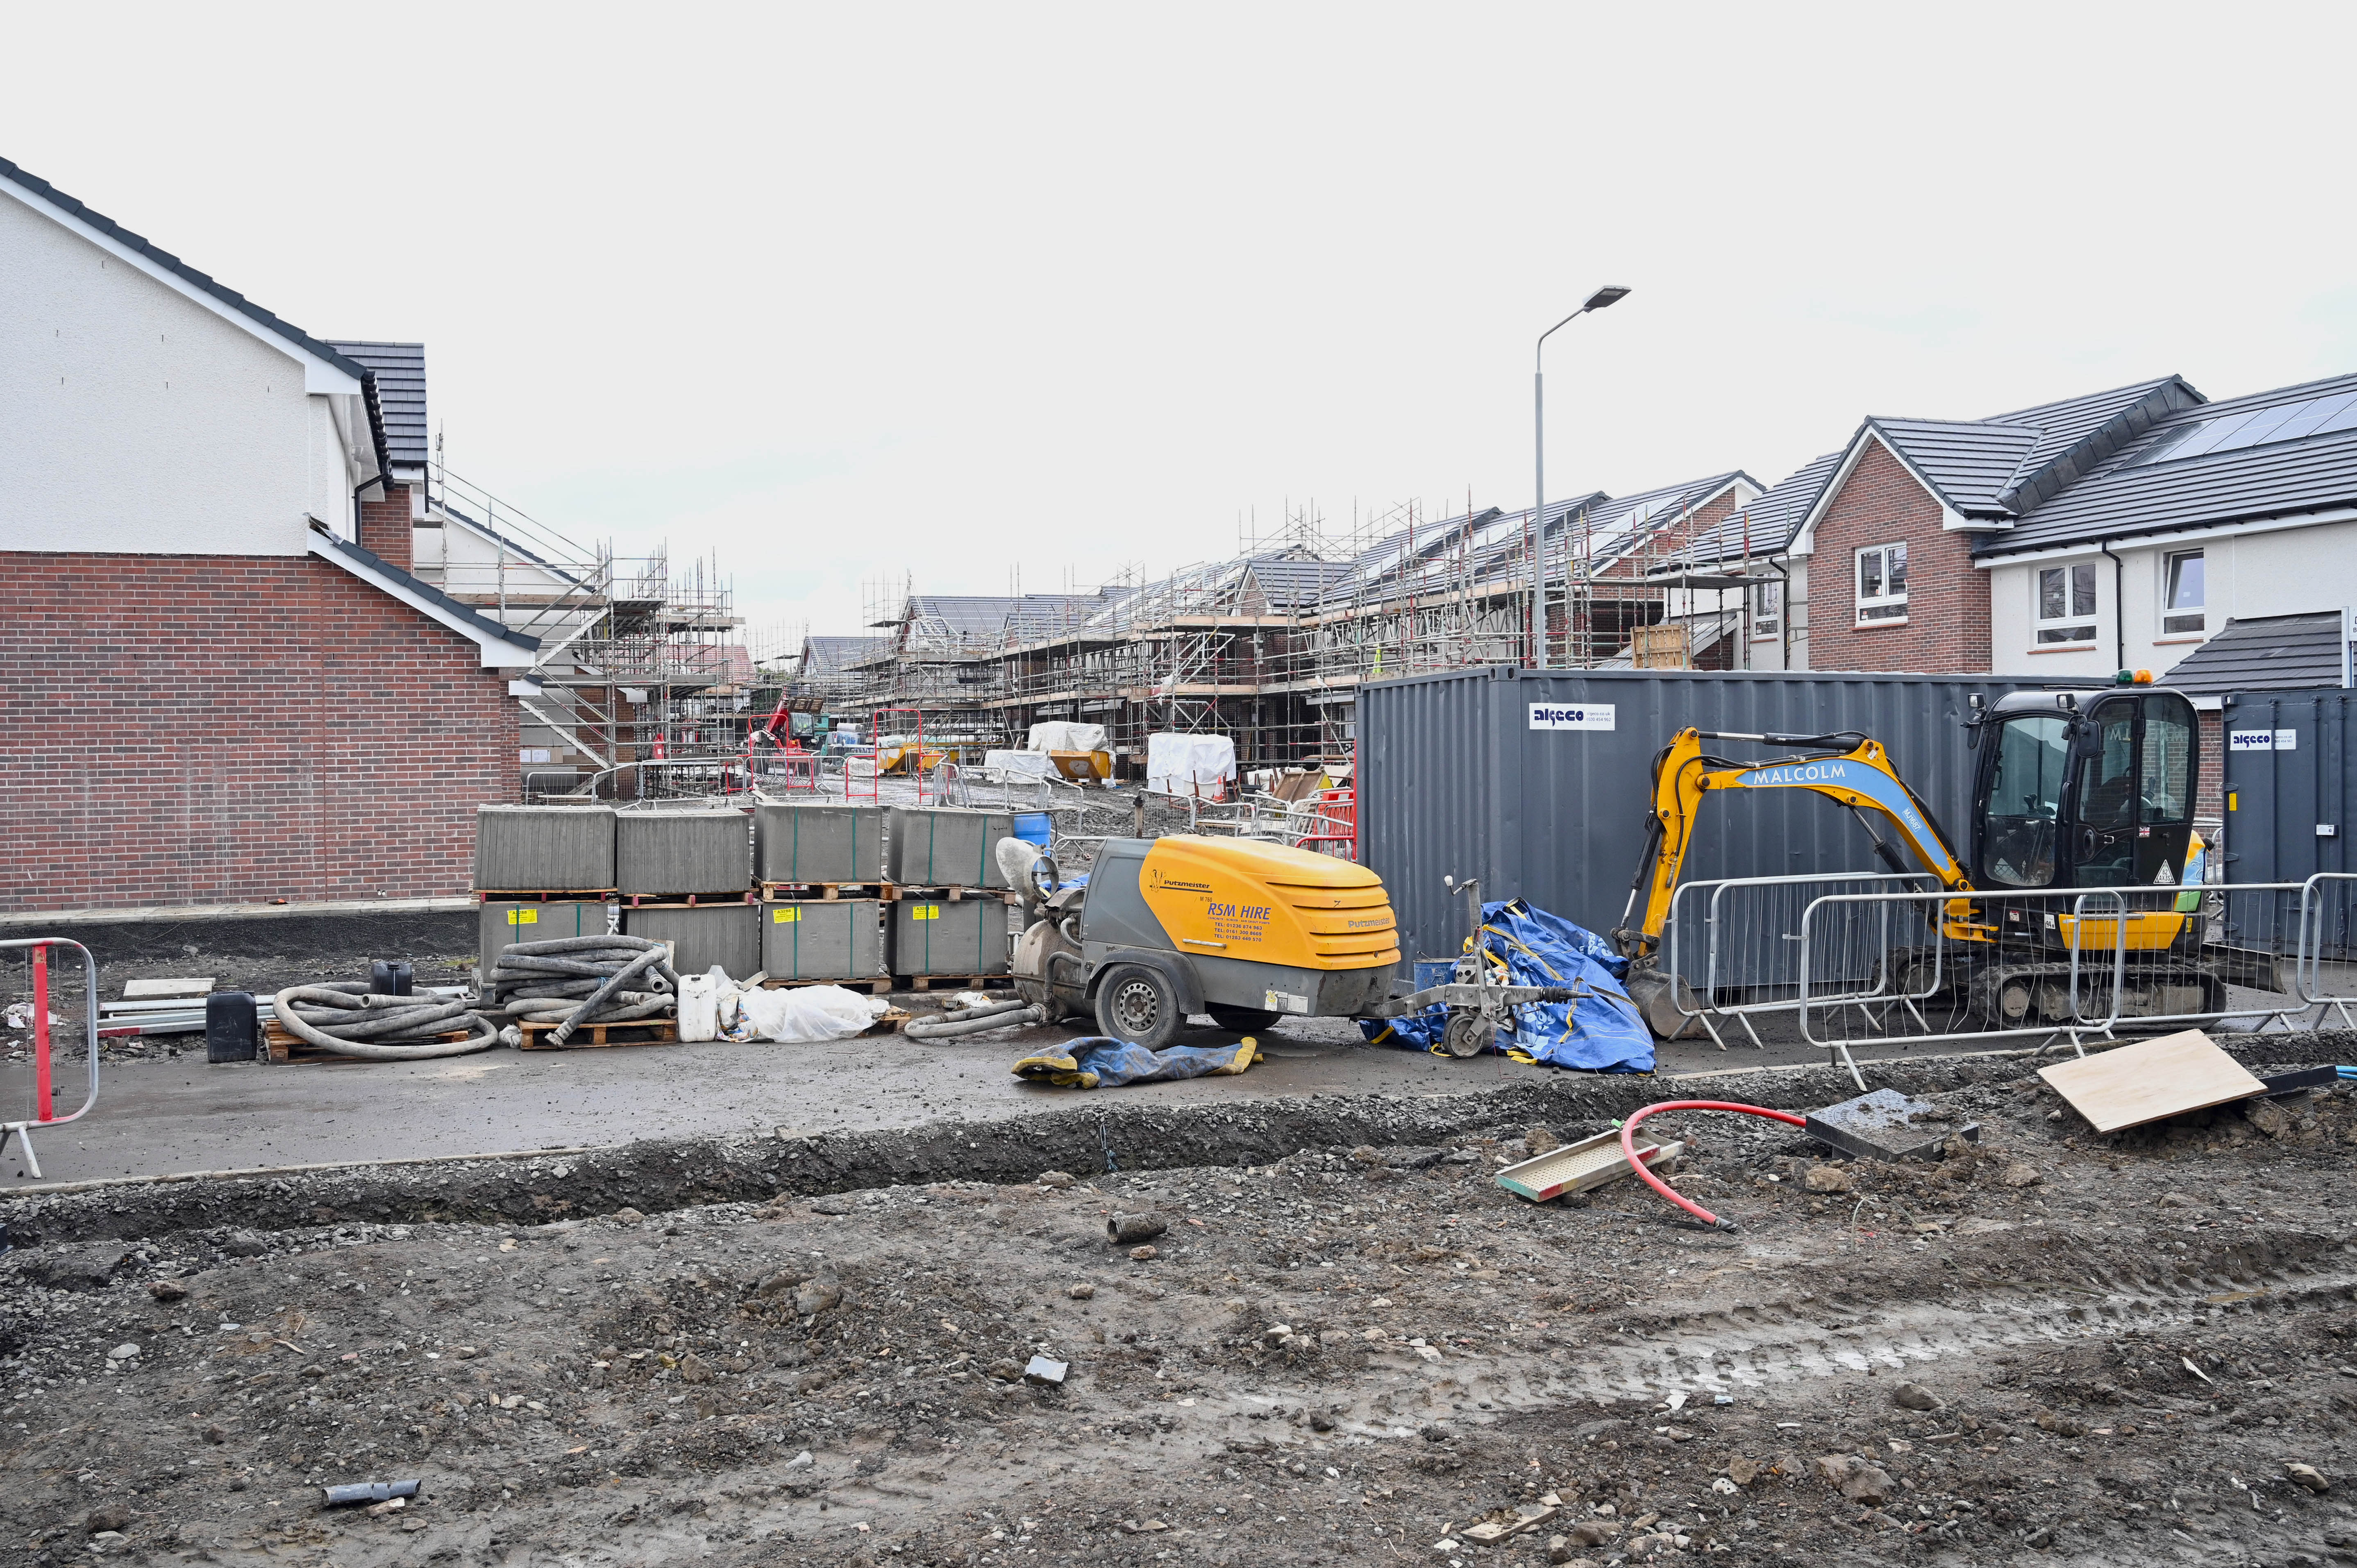 New sites agreed for North Lanarkshire Council homes